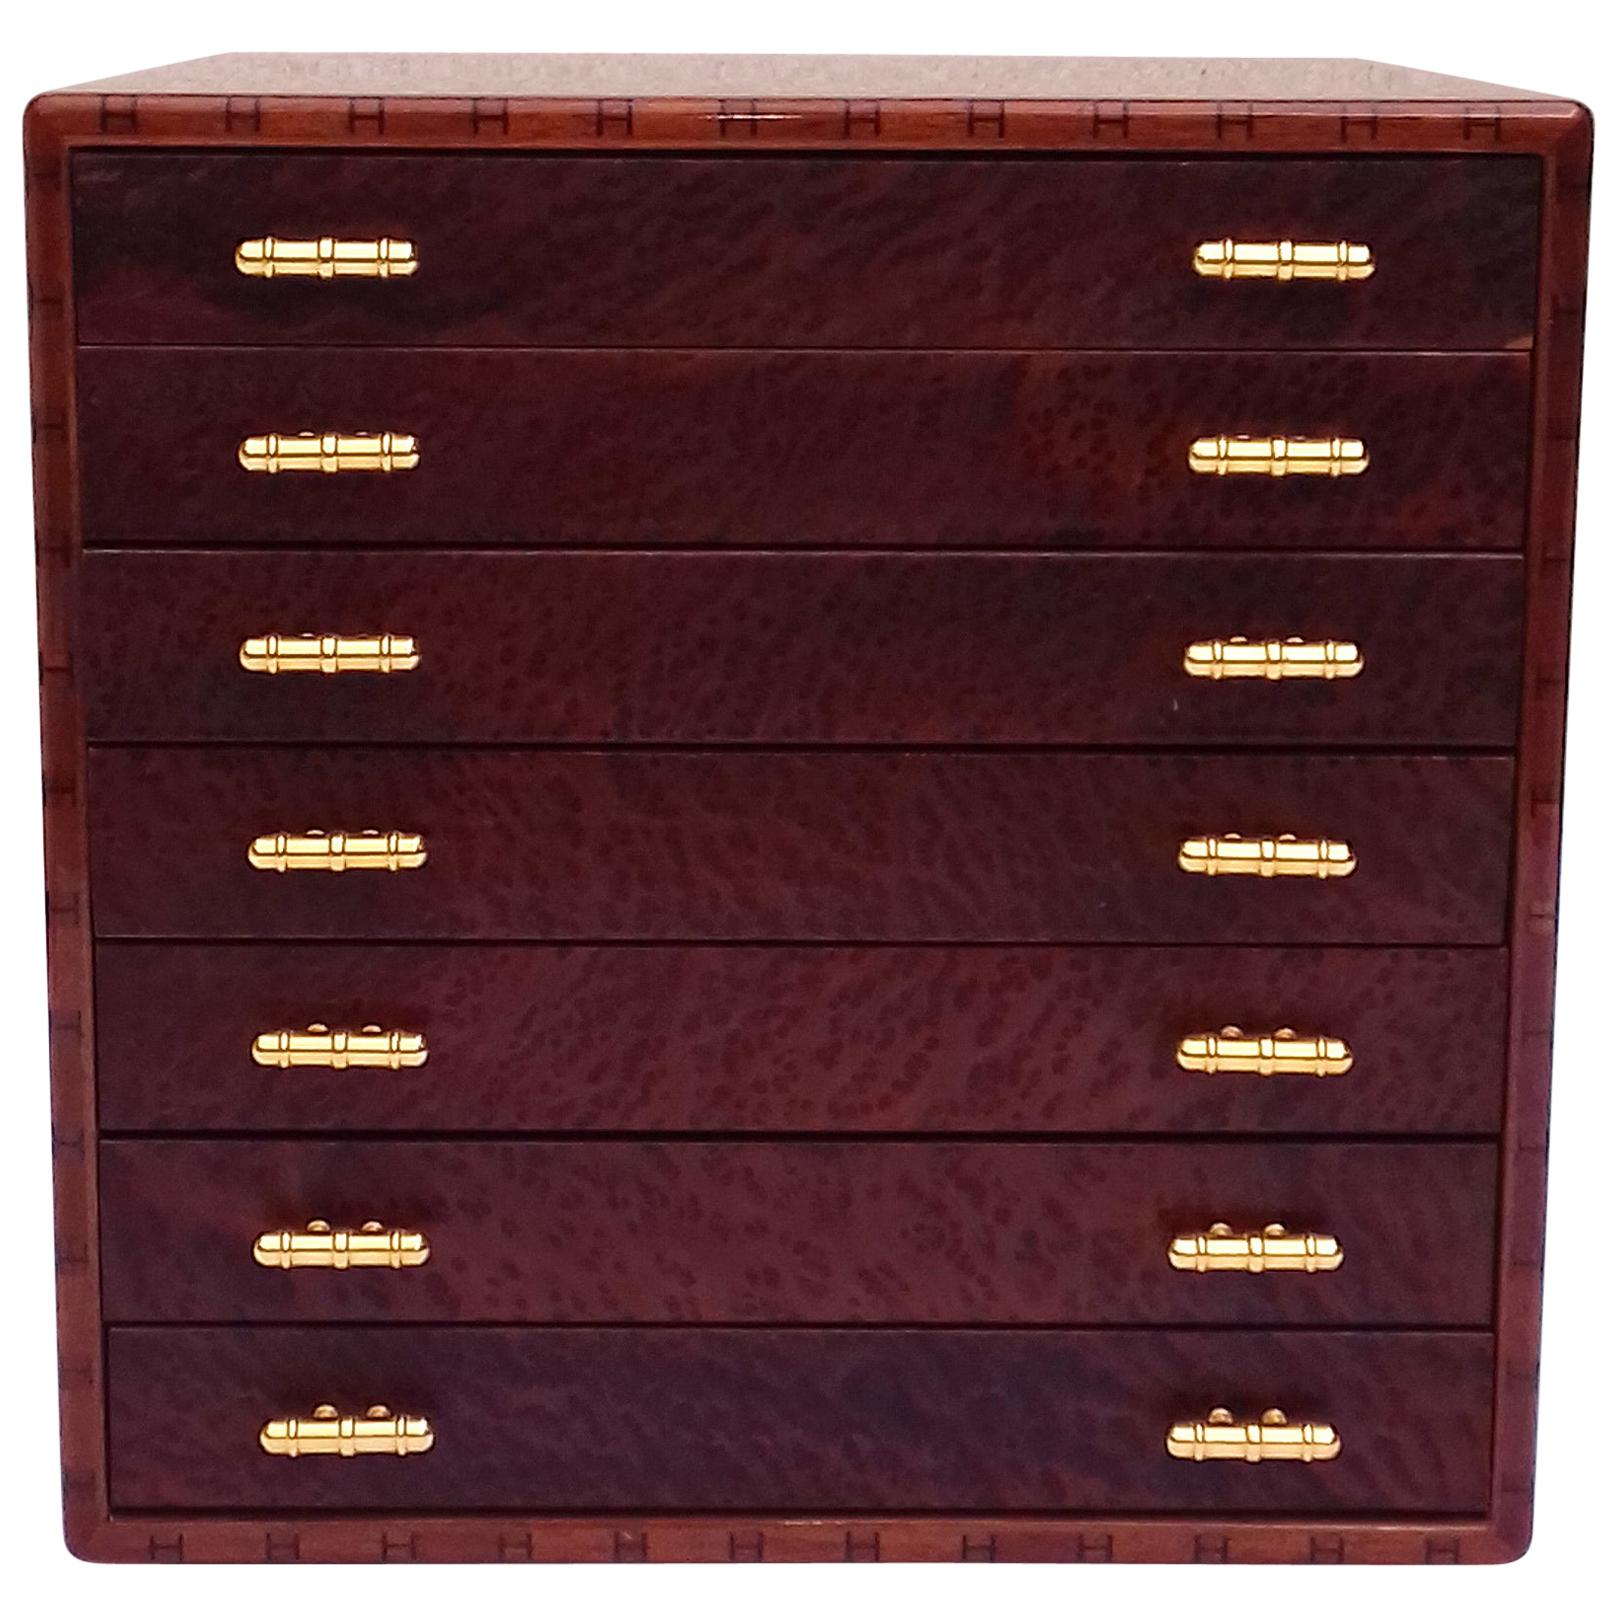 Exceptional Hermès Drawer to store scarves or Jewelry In Wood RARE